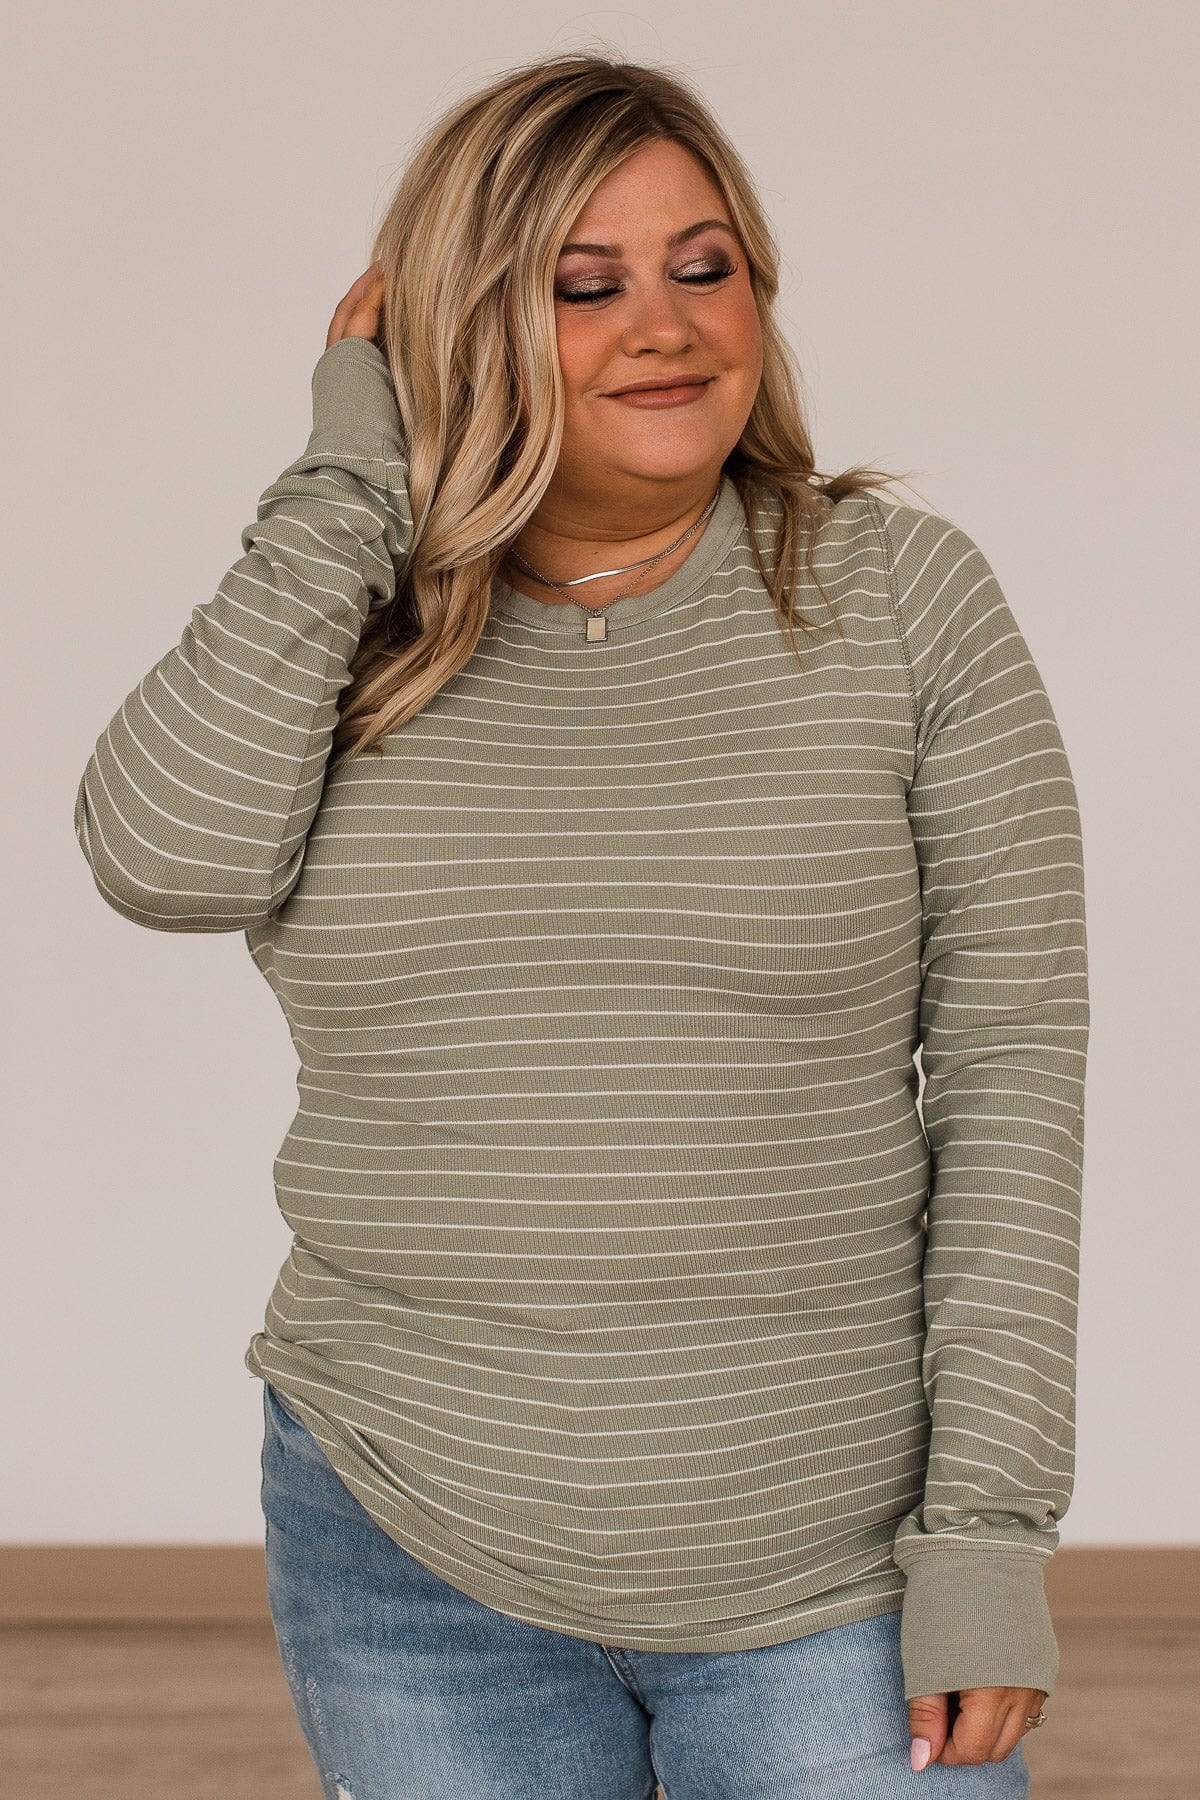 Thread & Supply New Adventures Knit Top- Dusty Sage